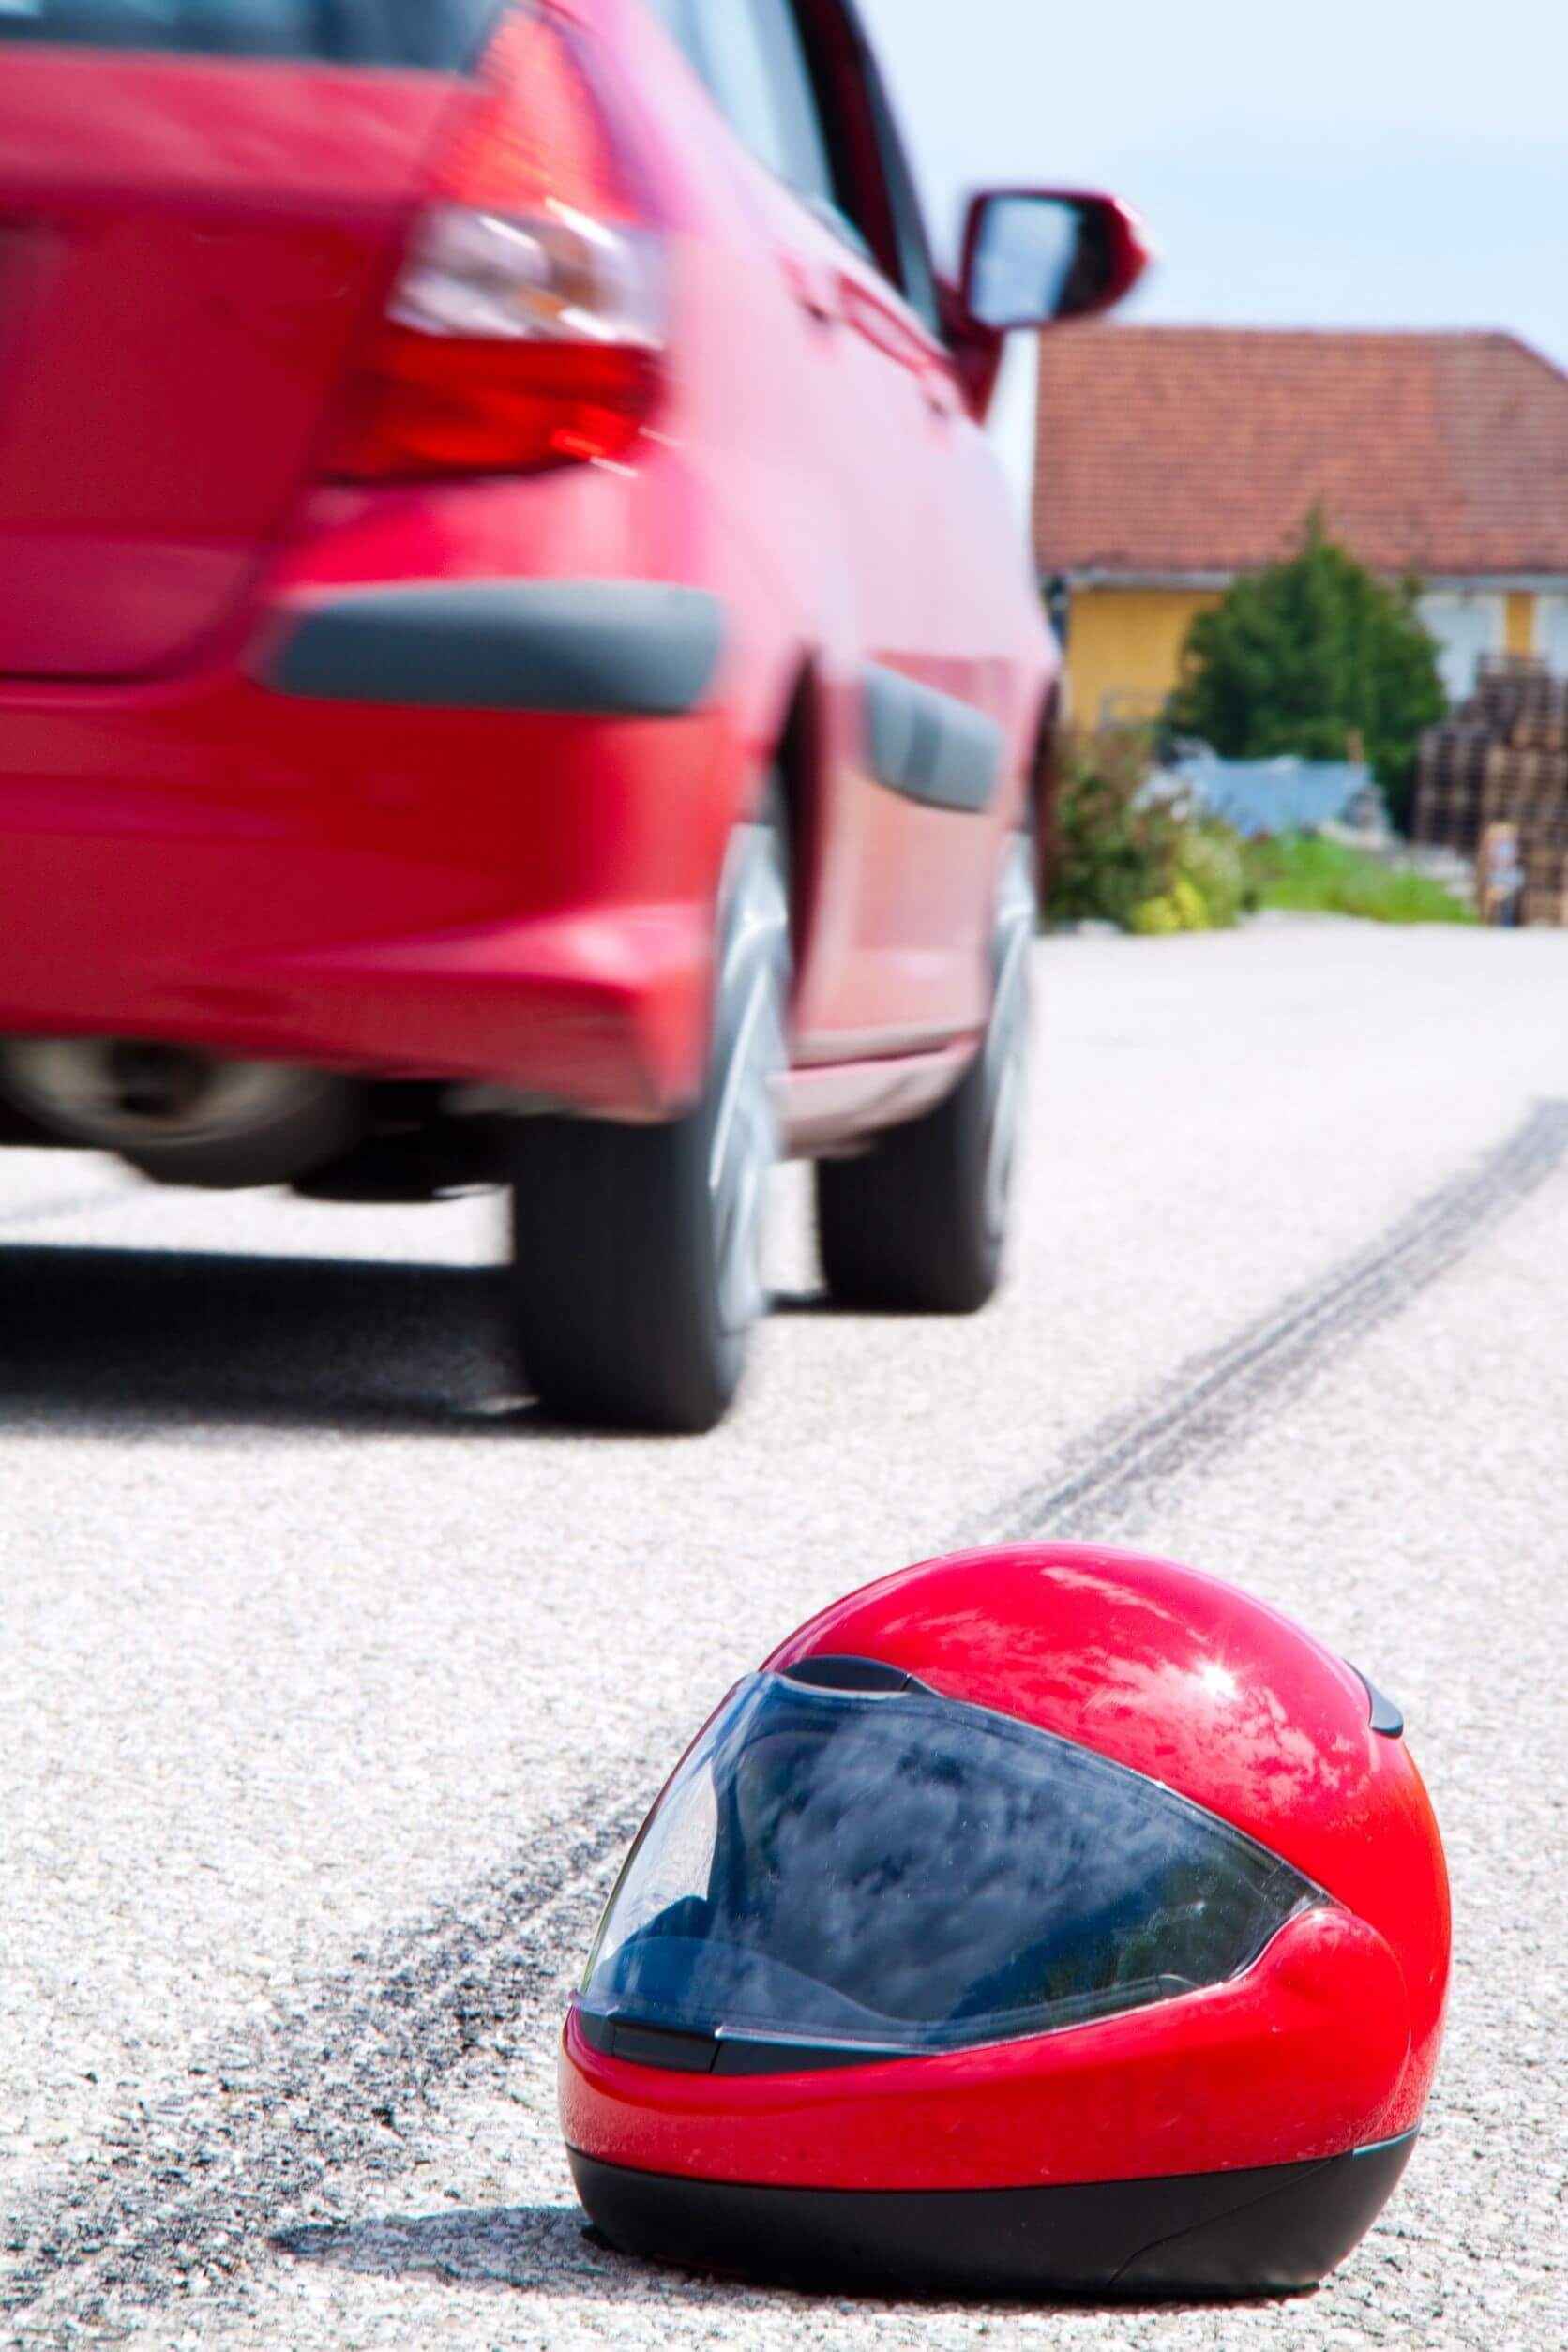 How to Determine Liability in Motorcycle Accidents